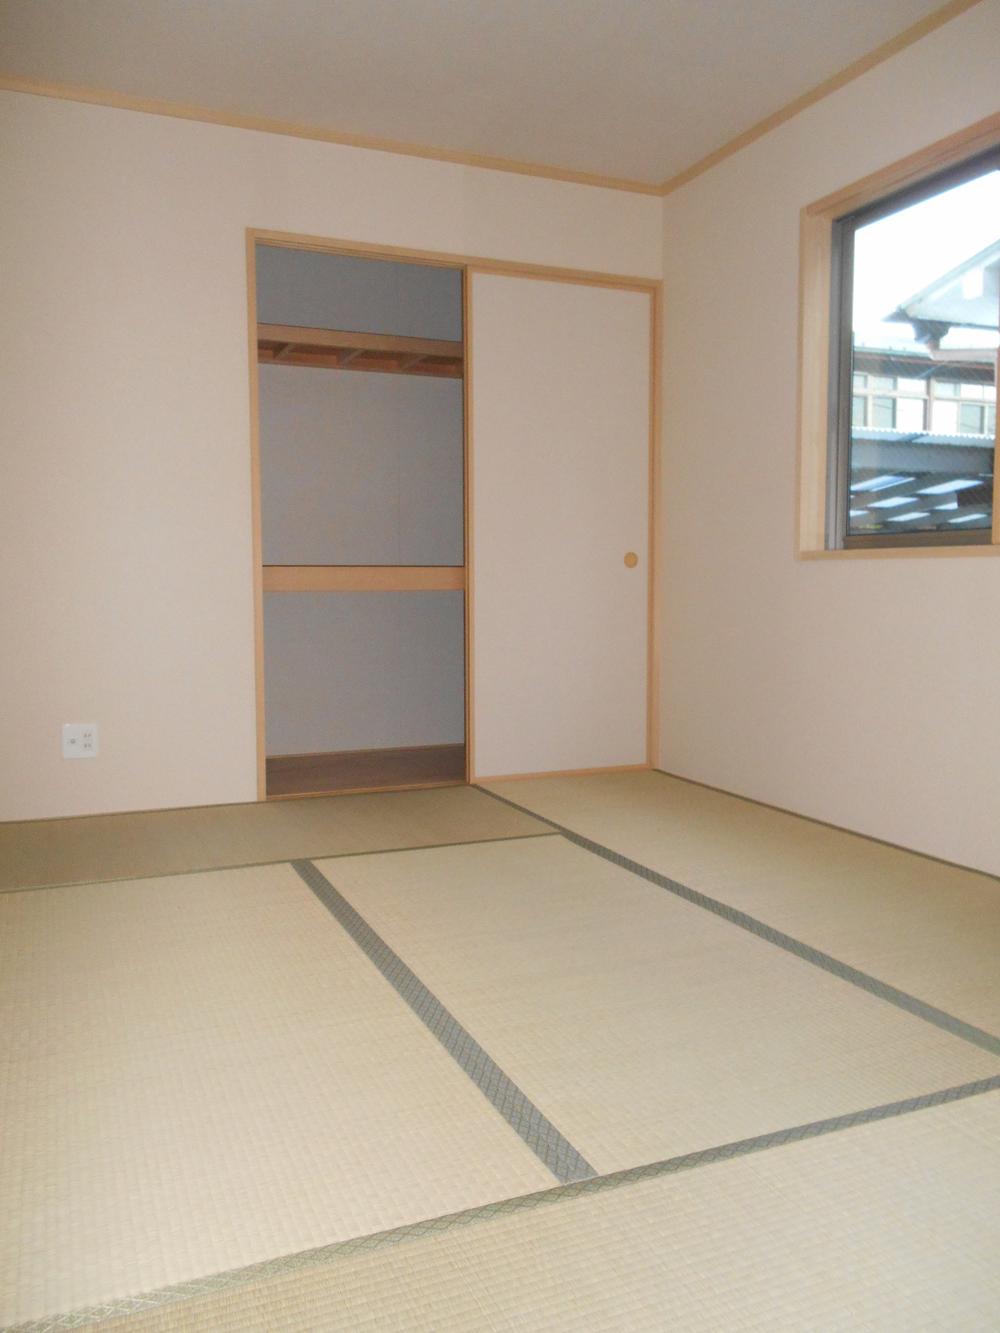 Non-living room. Building 2: Japanese-style room 6 quires